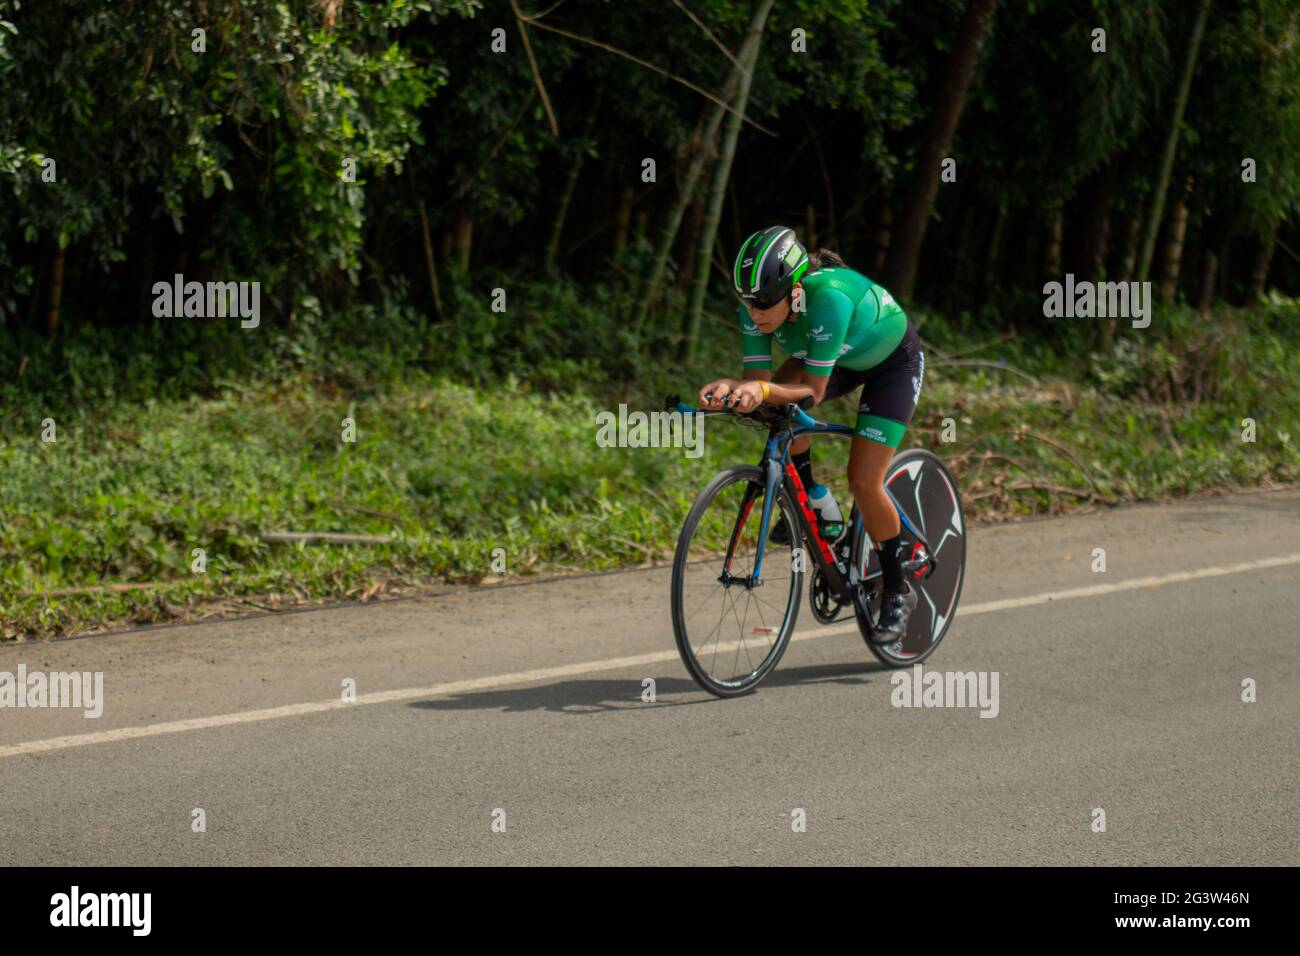 Virginia, Colombia. 17th June, 2021. A member of the team 'Boyaca Avanza' during the time trials at Virginia, Risaralda, Colombia of the Colombian National Road Race Championship, 2021, on June 17, 2021. Credit: Long Visual Press/Alamy Live News Stock Photo